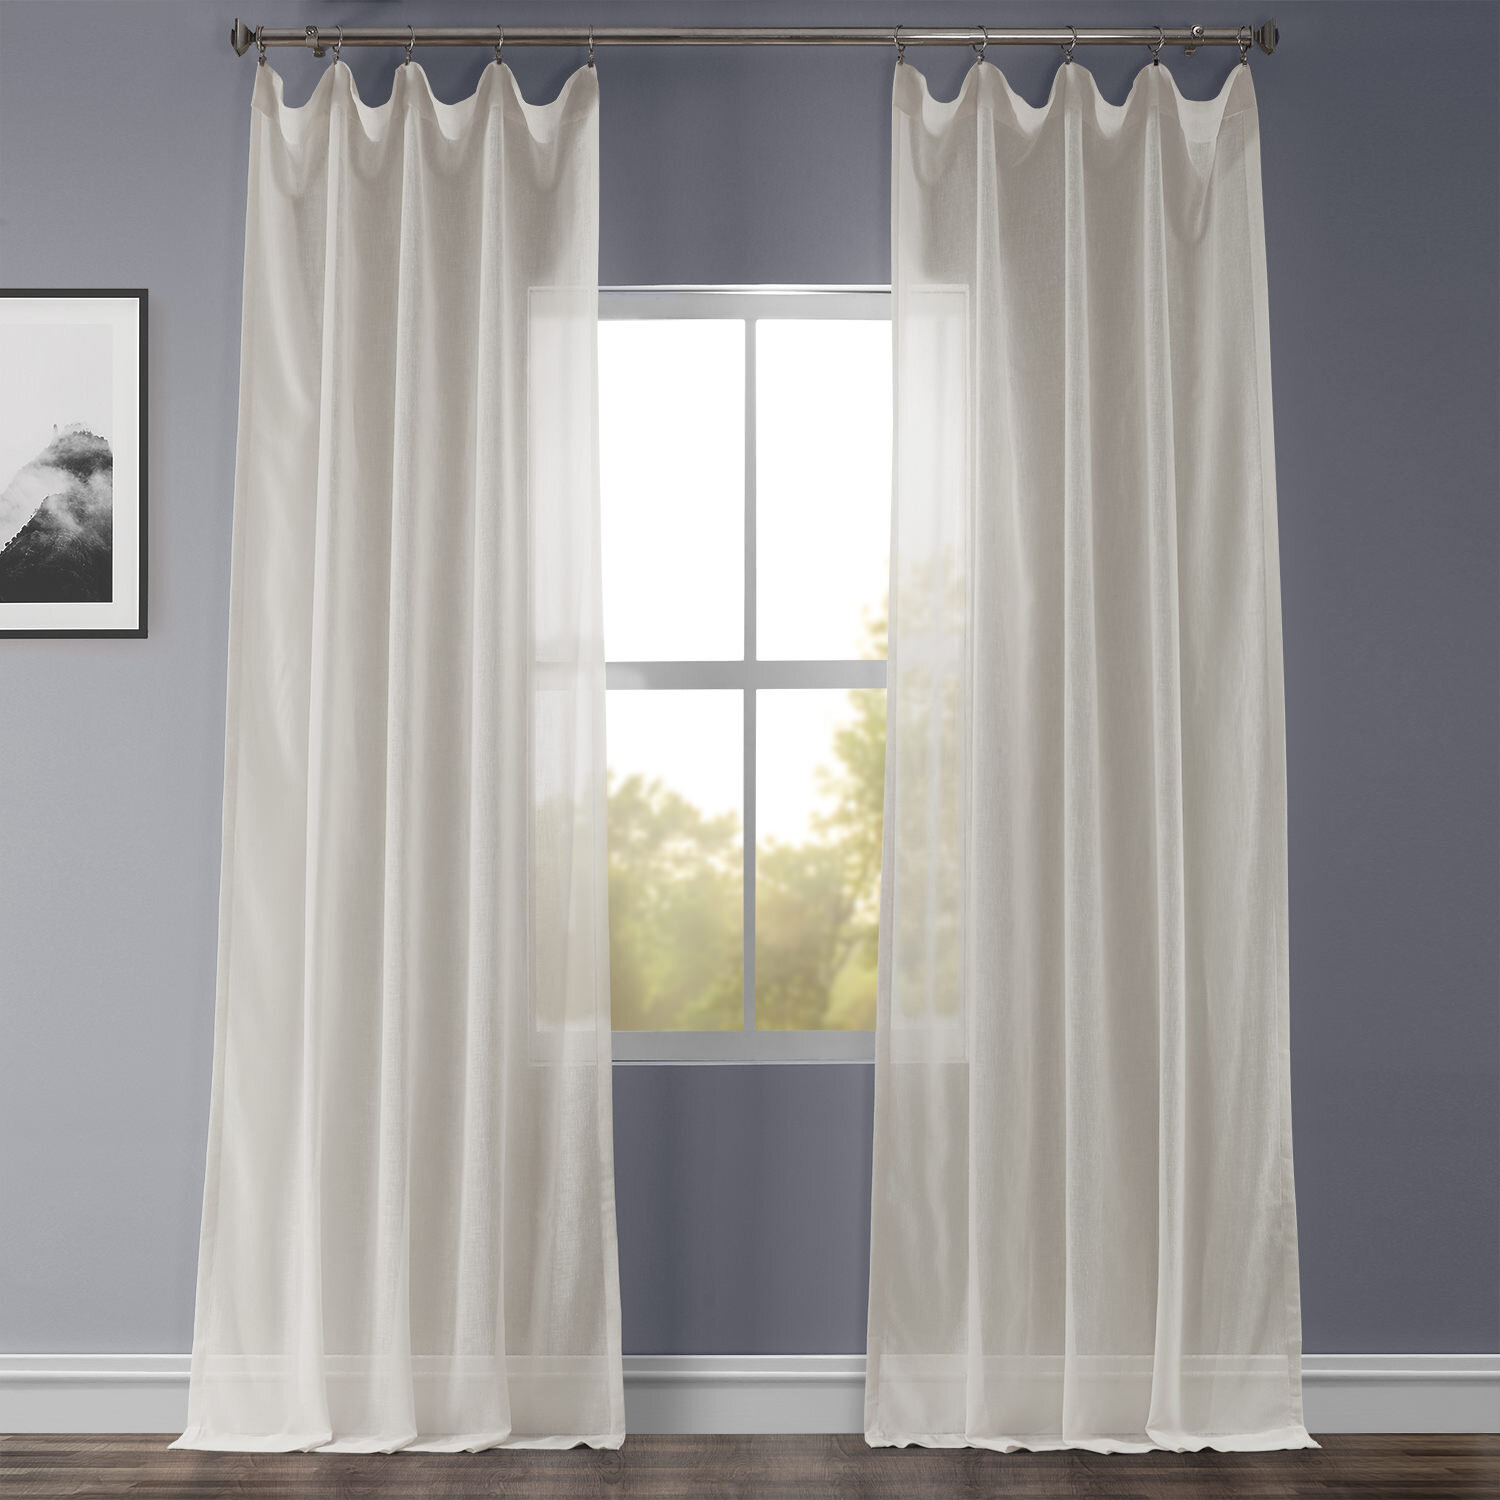 Lima Beautifull lined Crushed voile Curtains tie-backs included White & Cream, 